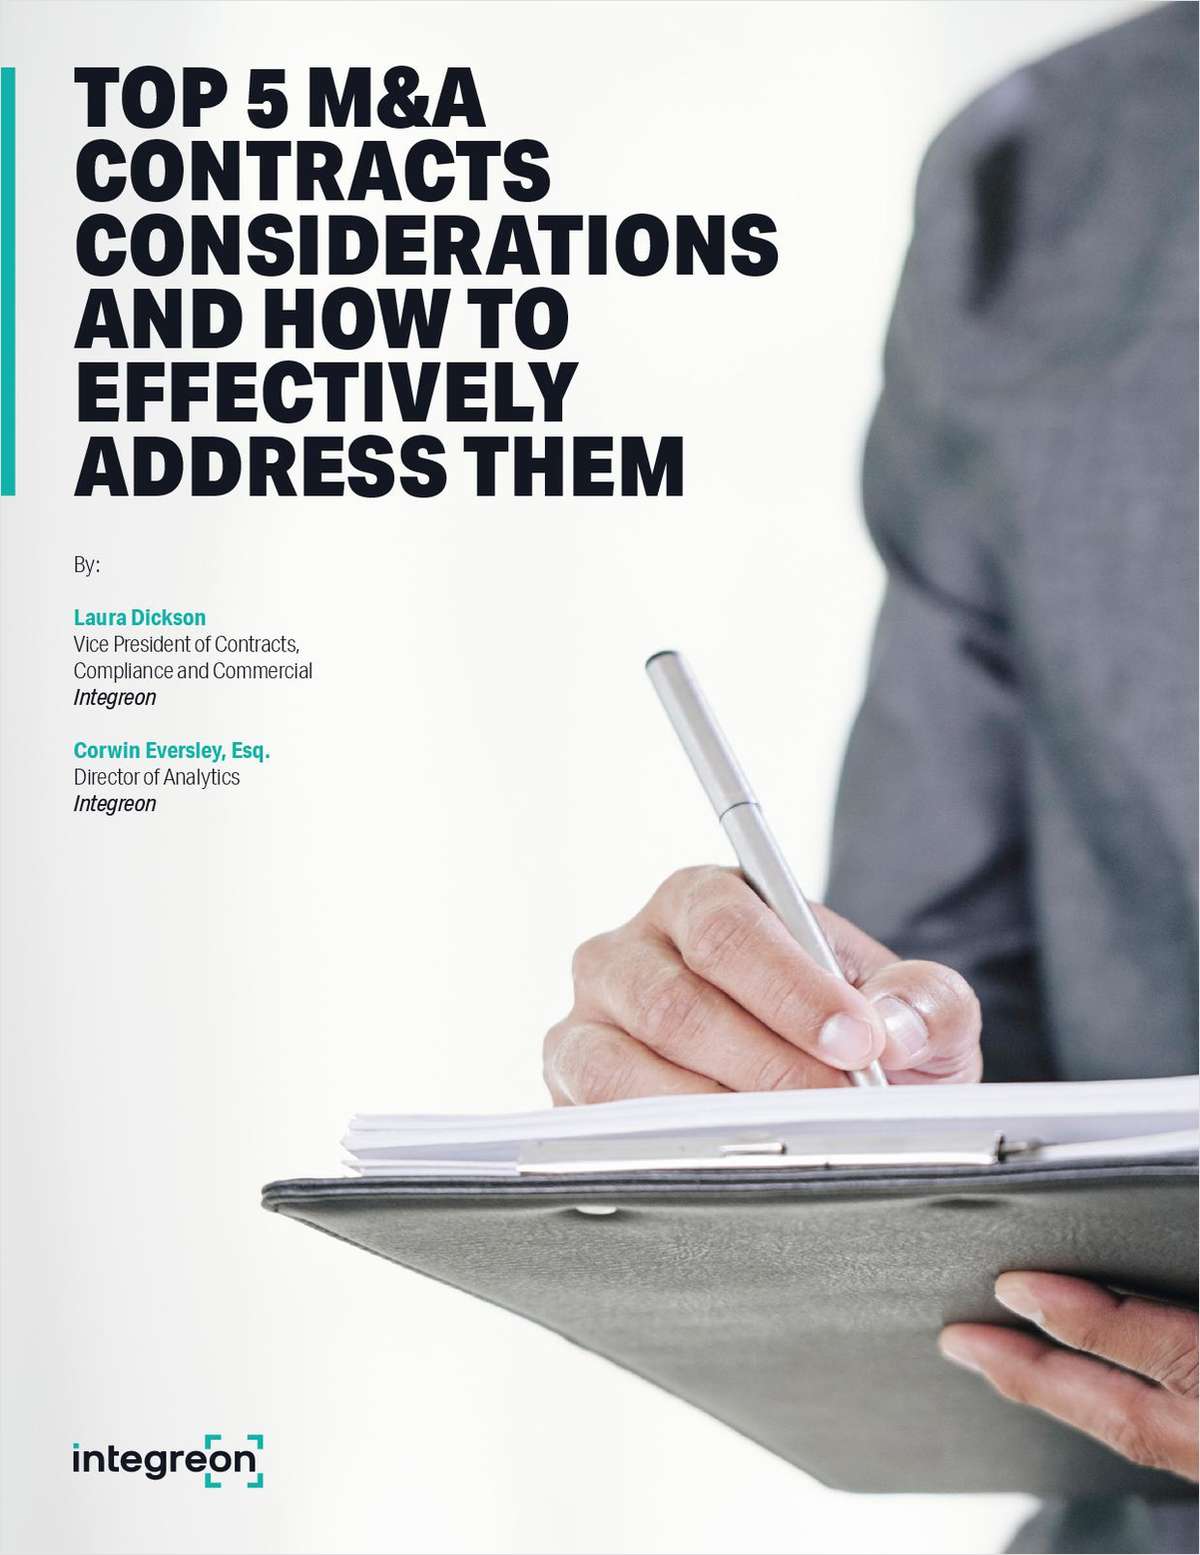 Top 5 M&A Contracts Considerations and How to Effectively Address Them